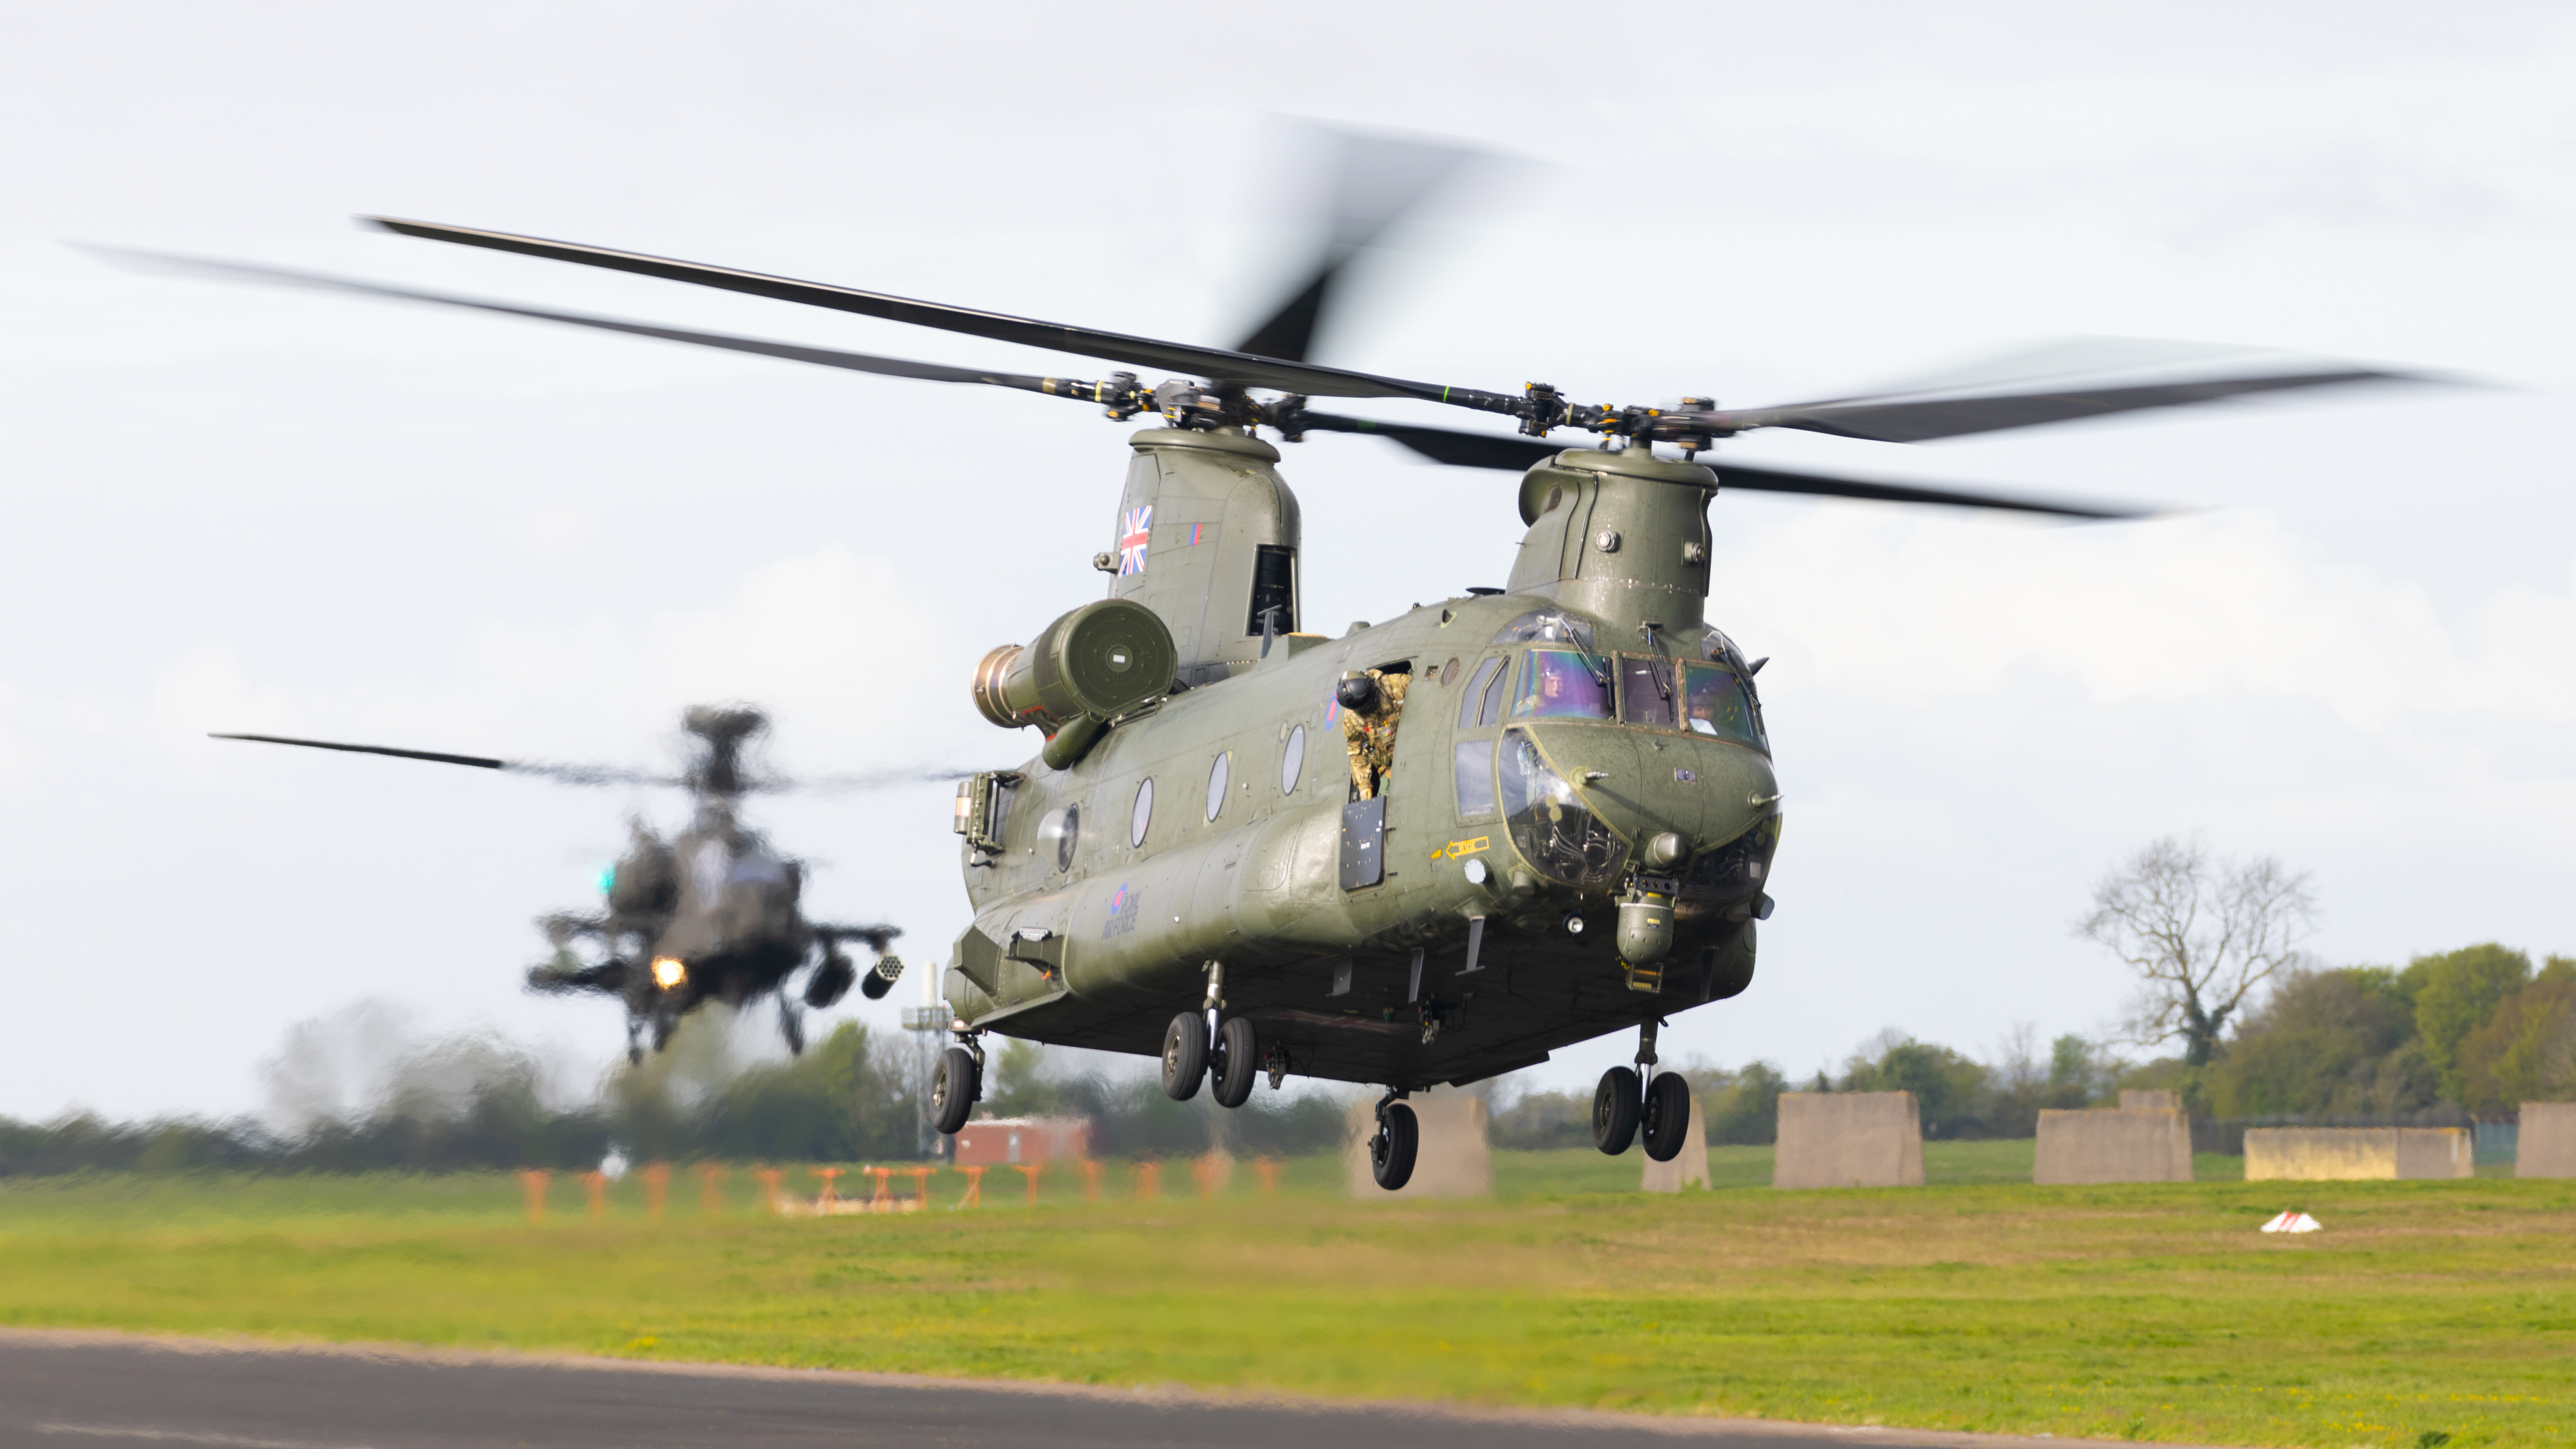 Image shows an RAF Chinook helicopter taking off.